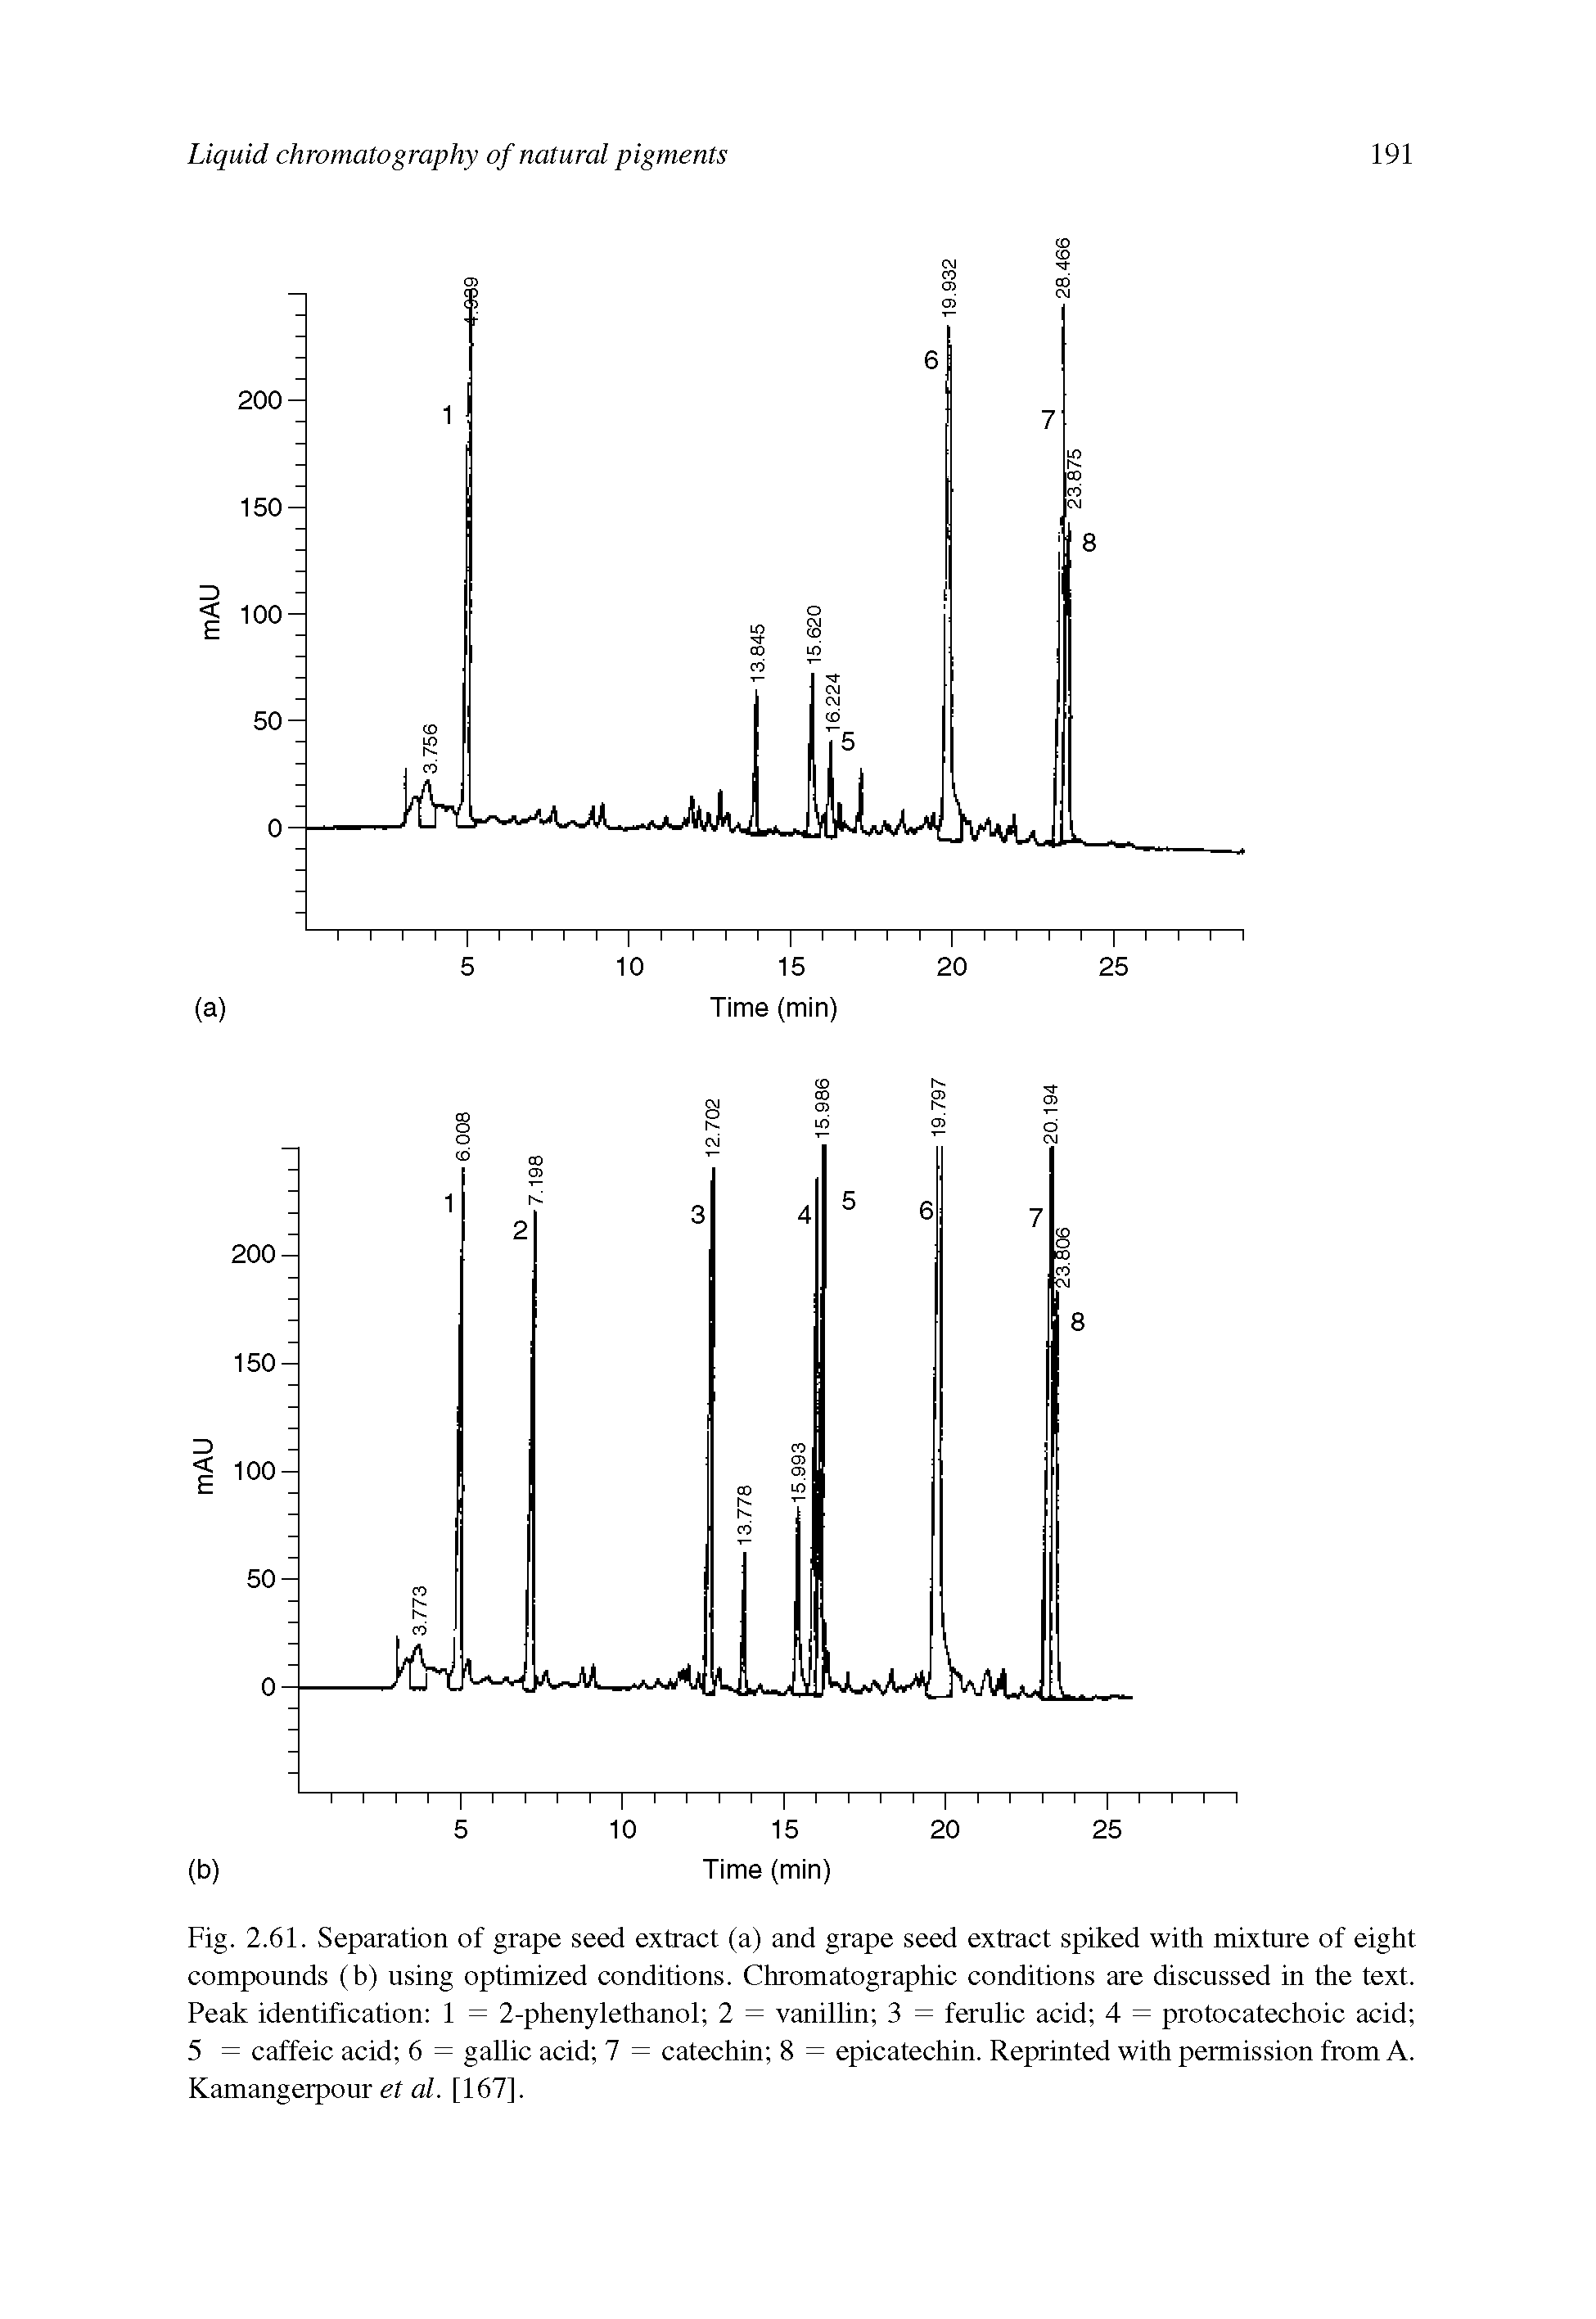 Fig. 2.61. Separation of grape seed extract (a) and grape seed extract spiked with mixture of eight compounds (b) using optimized conditions. Chromatographic conditions are discussed in the text. Peak identification 1 = 2-phenylethanol 2 = vanillin 3 = ferulic acid 4 = protocatechoic acid 5 = caffeic acid 6 = gallic acid 7 = catechin 8 = epicatechin. Reprinted with permission from A. Kamangerpour et al. [167].